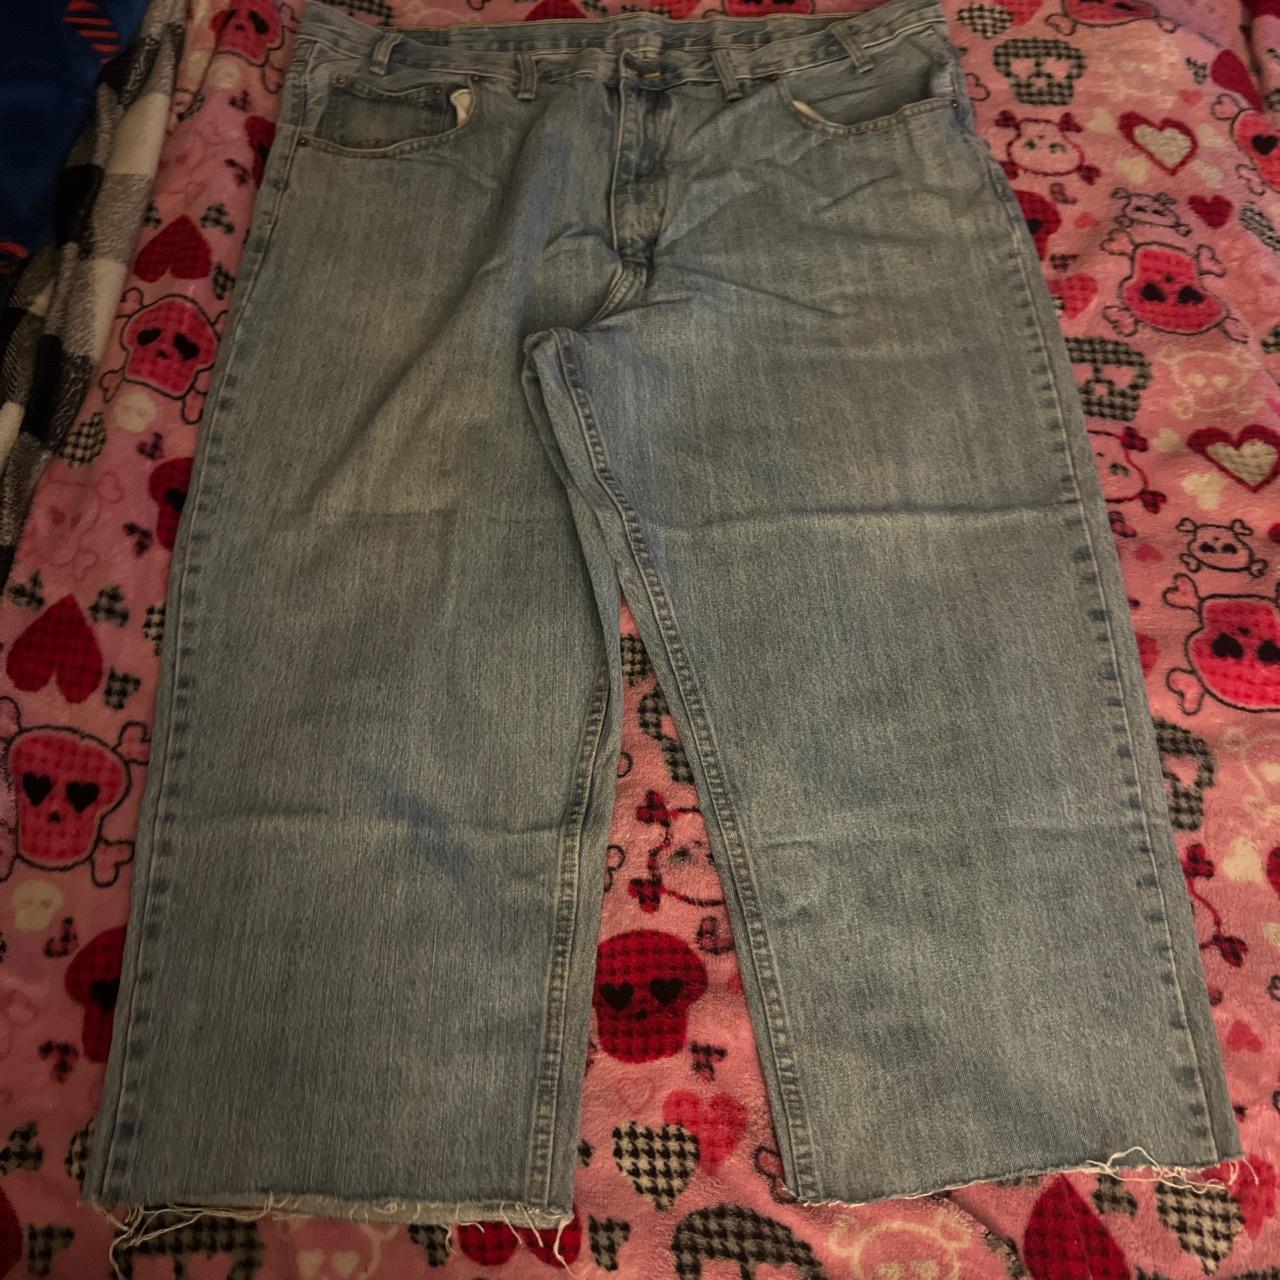 Arizon Relaxed Fit Jeans Size 44x24 9.75 in leg opening - Depop